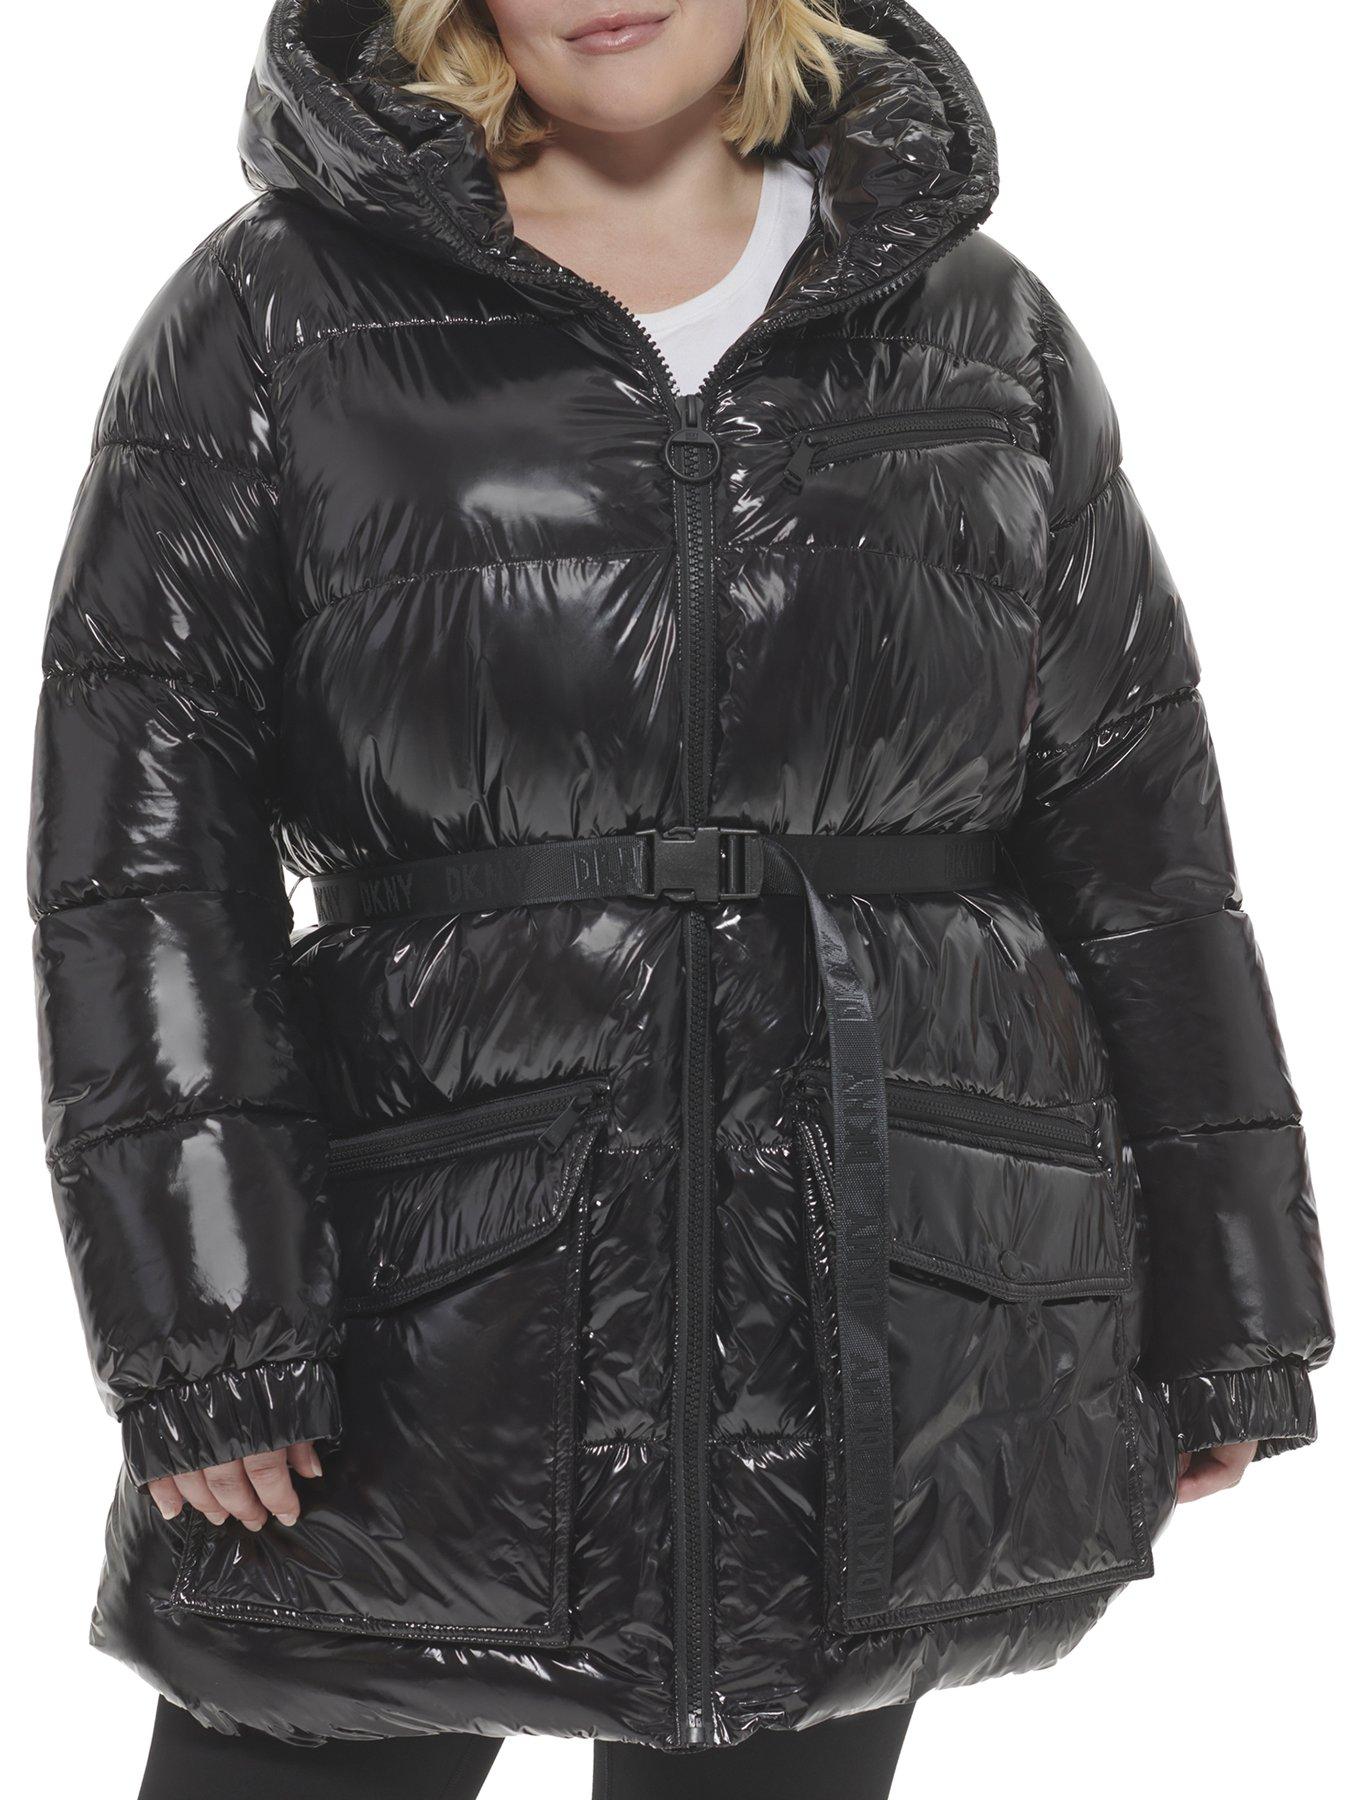 DKNY SPORT Belted High Shine Padded Jacket In Plus Size - Black